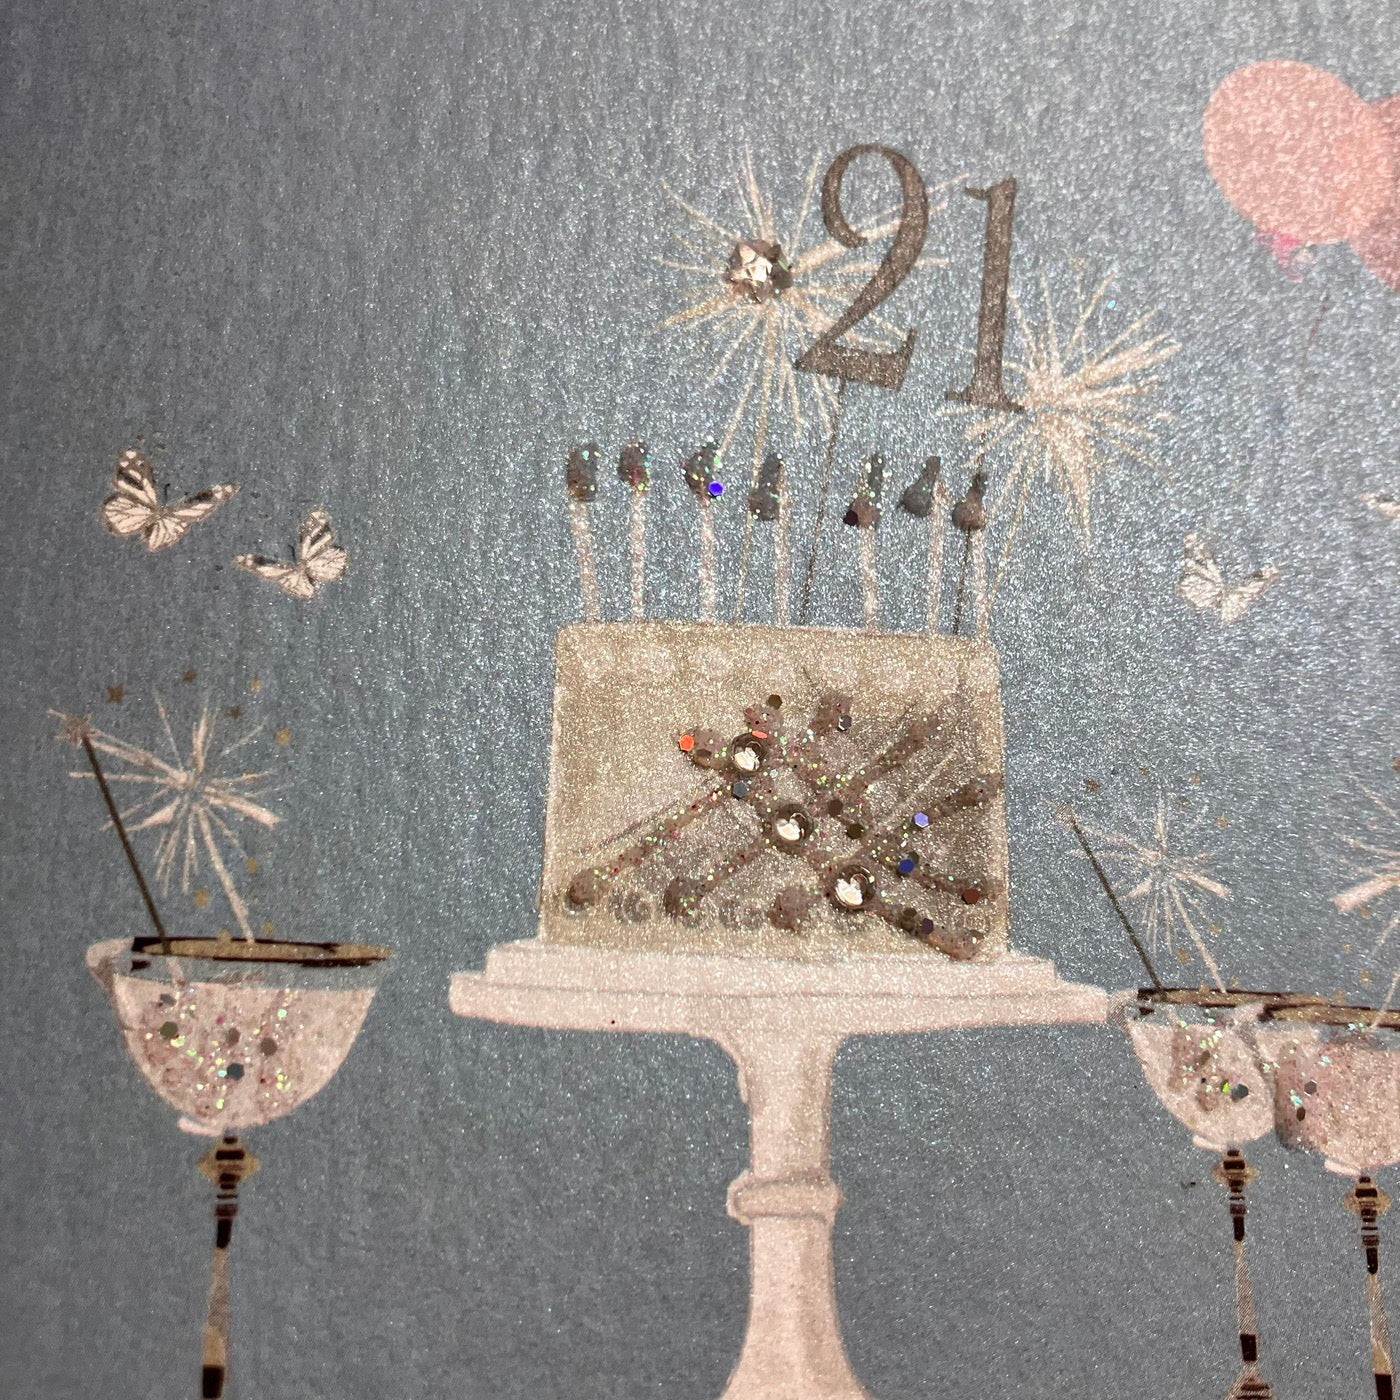 21st Birthday Teal Blue Sparkly Cake & Glasses Card - White Cotton Cards